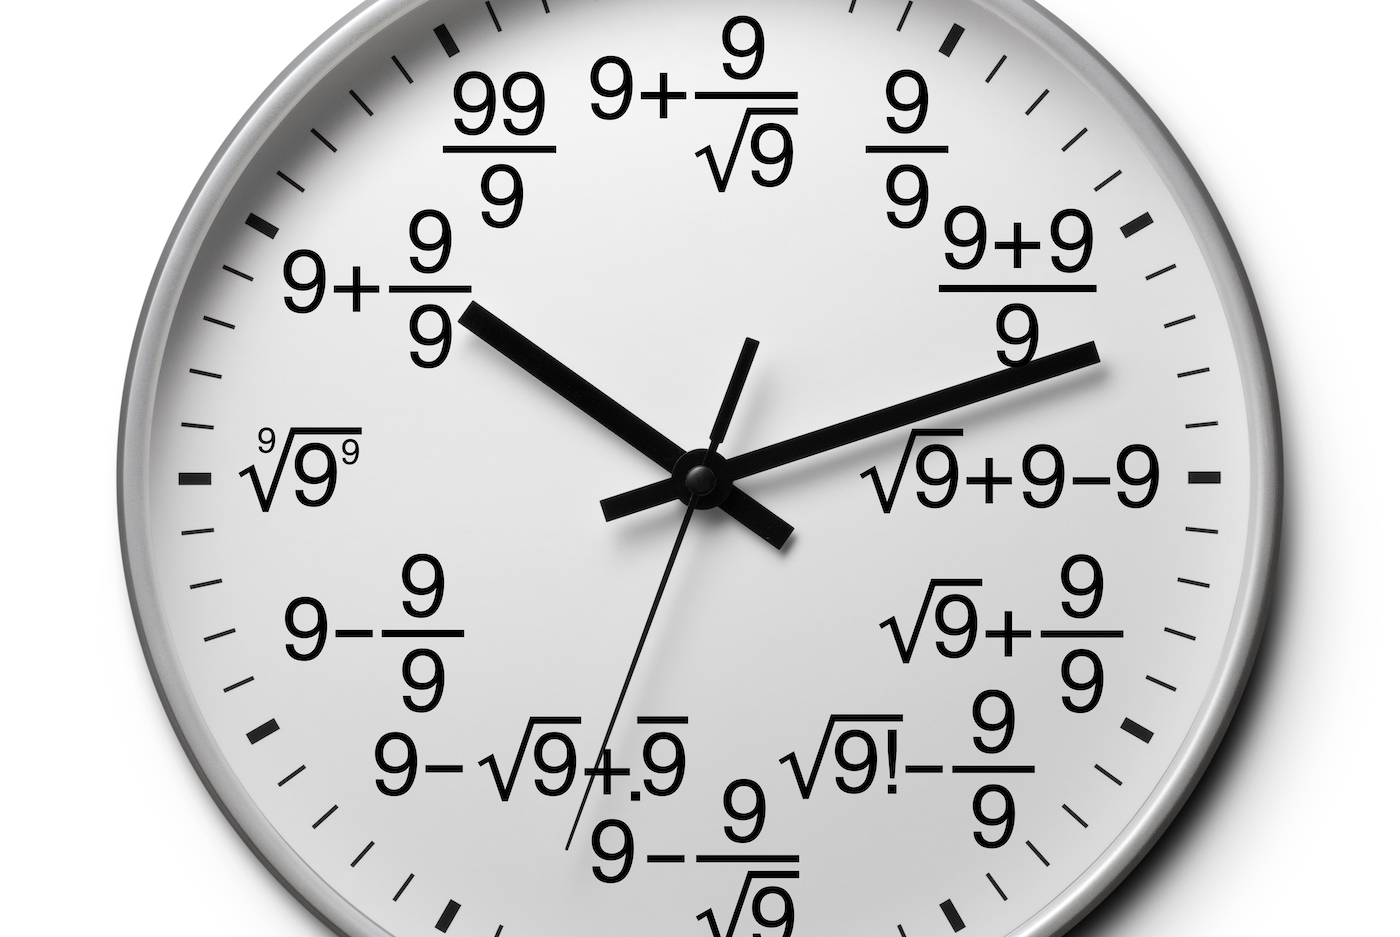 A watch face hat showing equations instead of numbers on a white background.